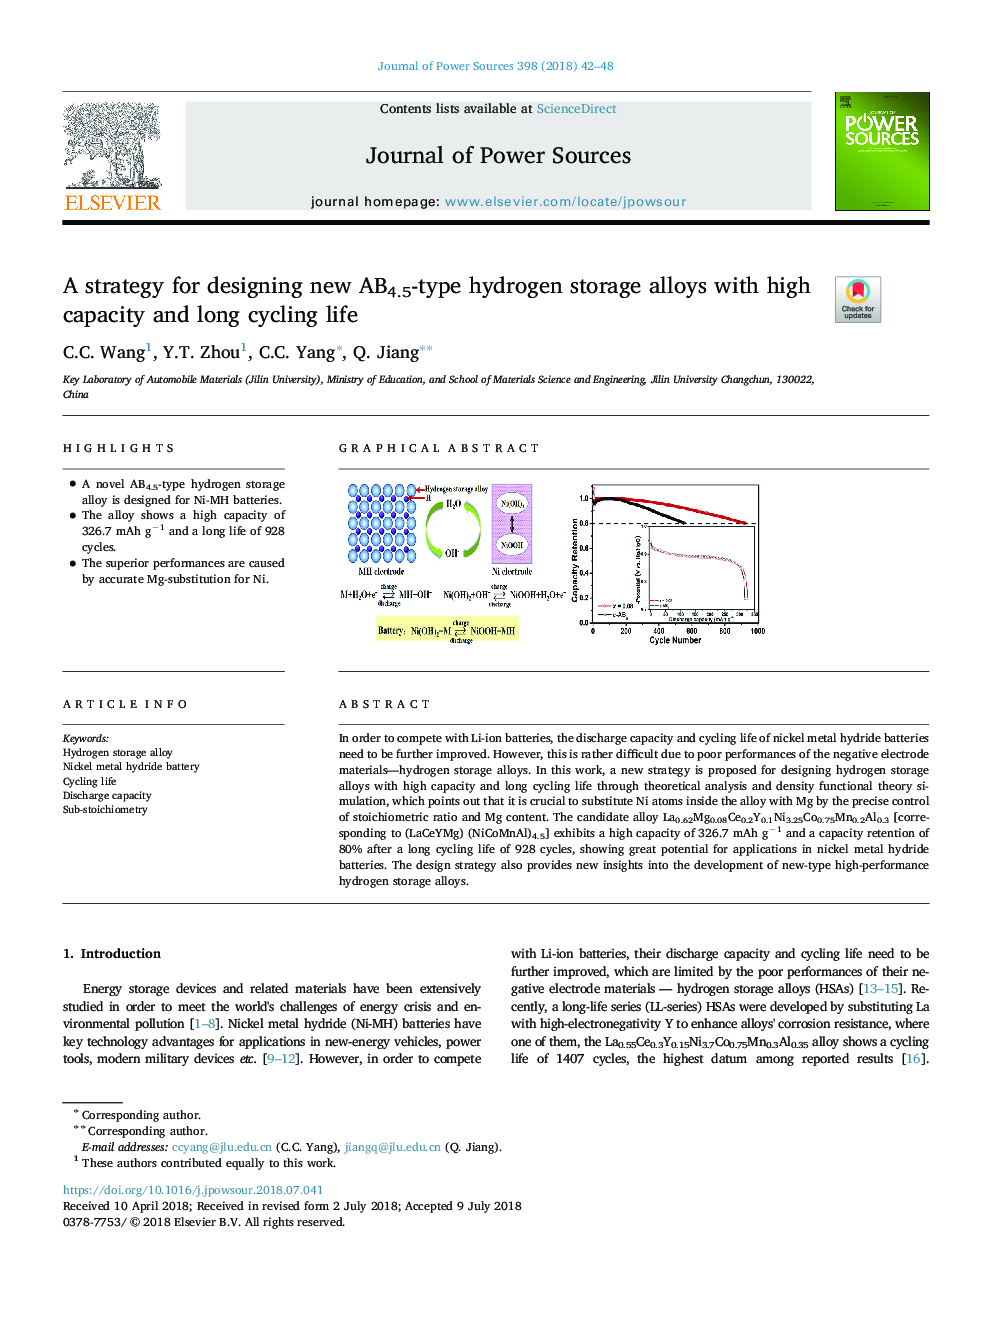 A strategy for designing new AB4.5-type hydrogen storage alloys with high capacity and long cycling life